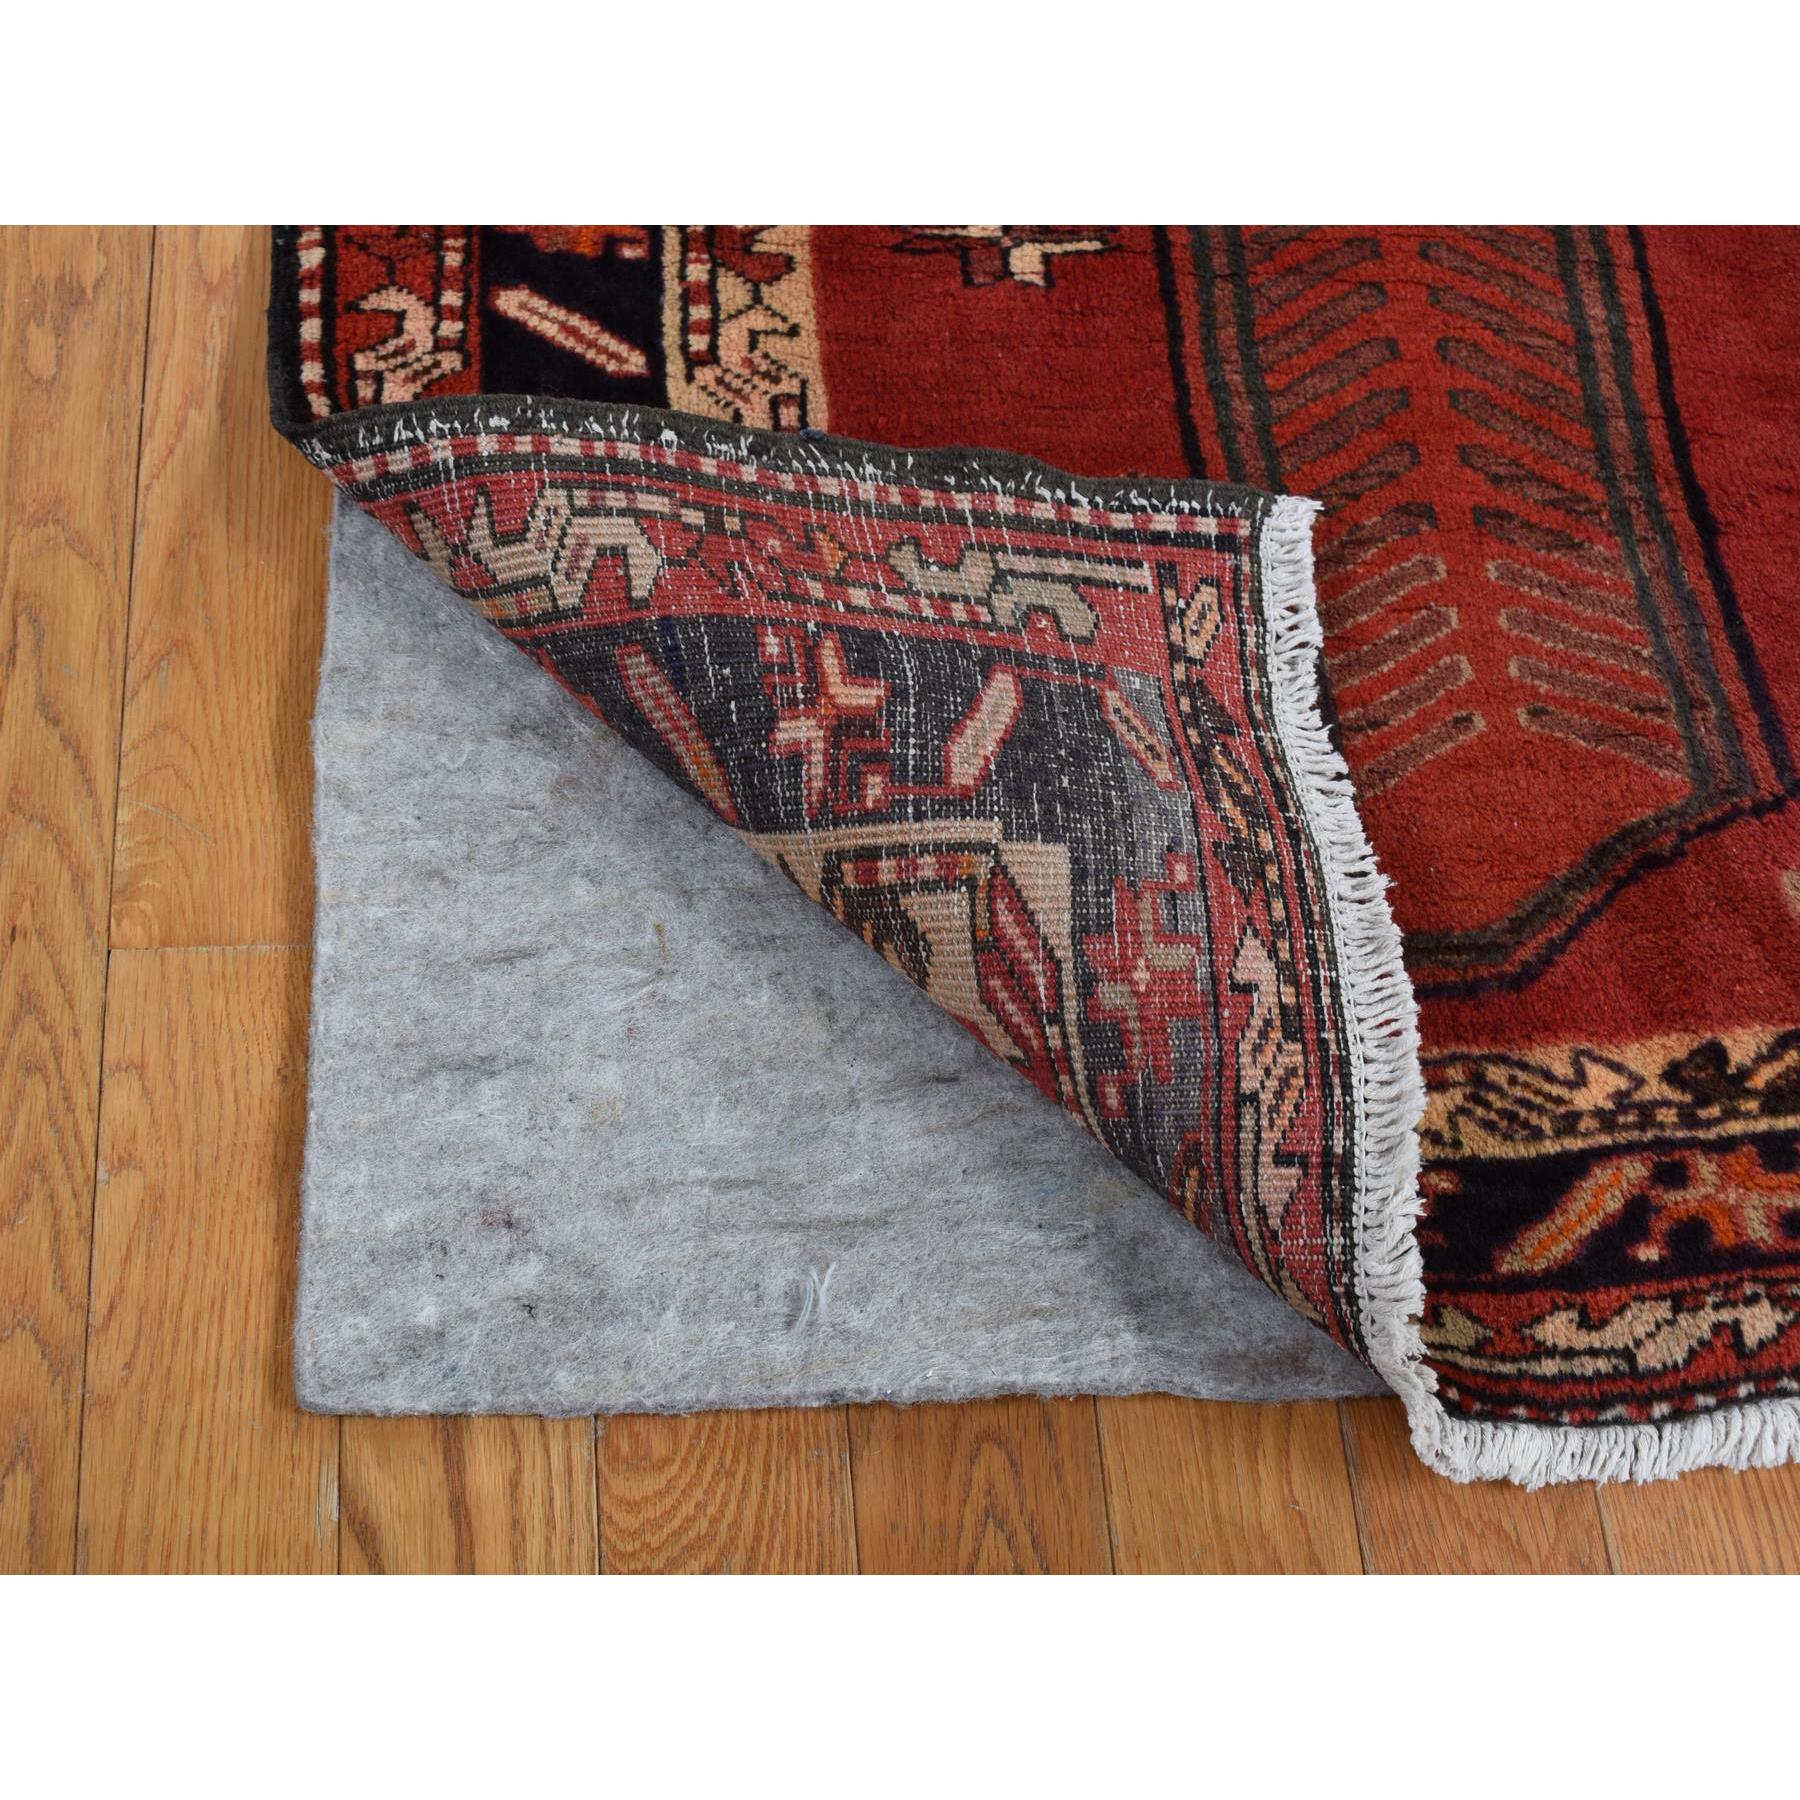 4'1"x9'7" Chili Red, Vintage Bohemian North West Persian with Large Elements, Hand Woven, Pure Wool, Wide Runner Oriental Rug 